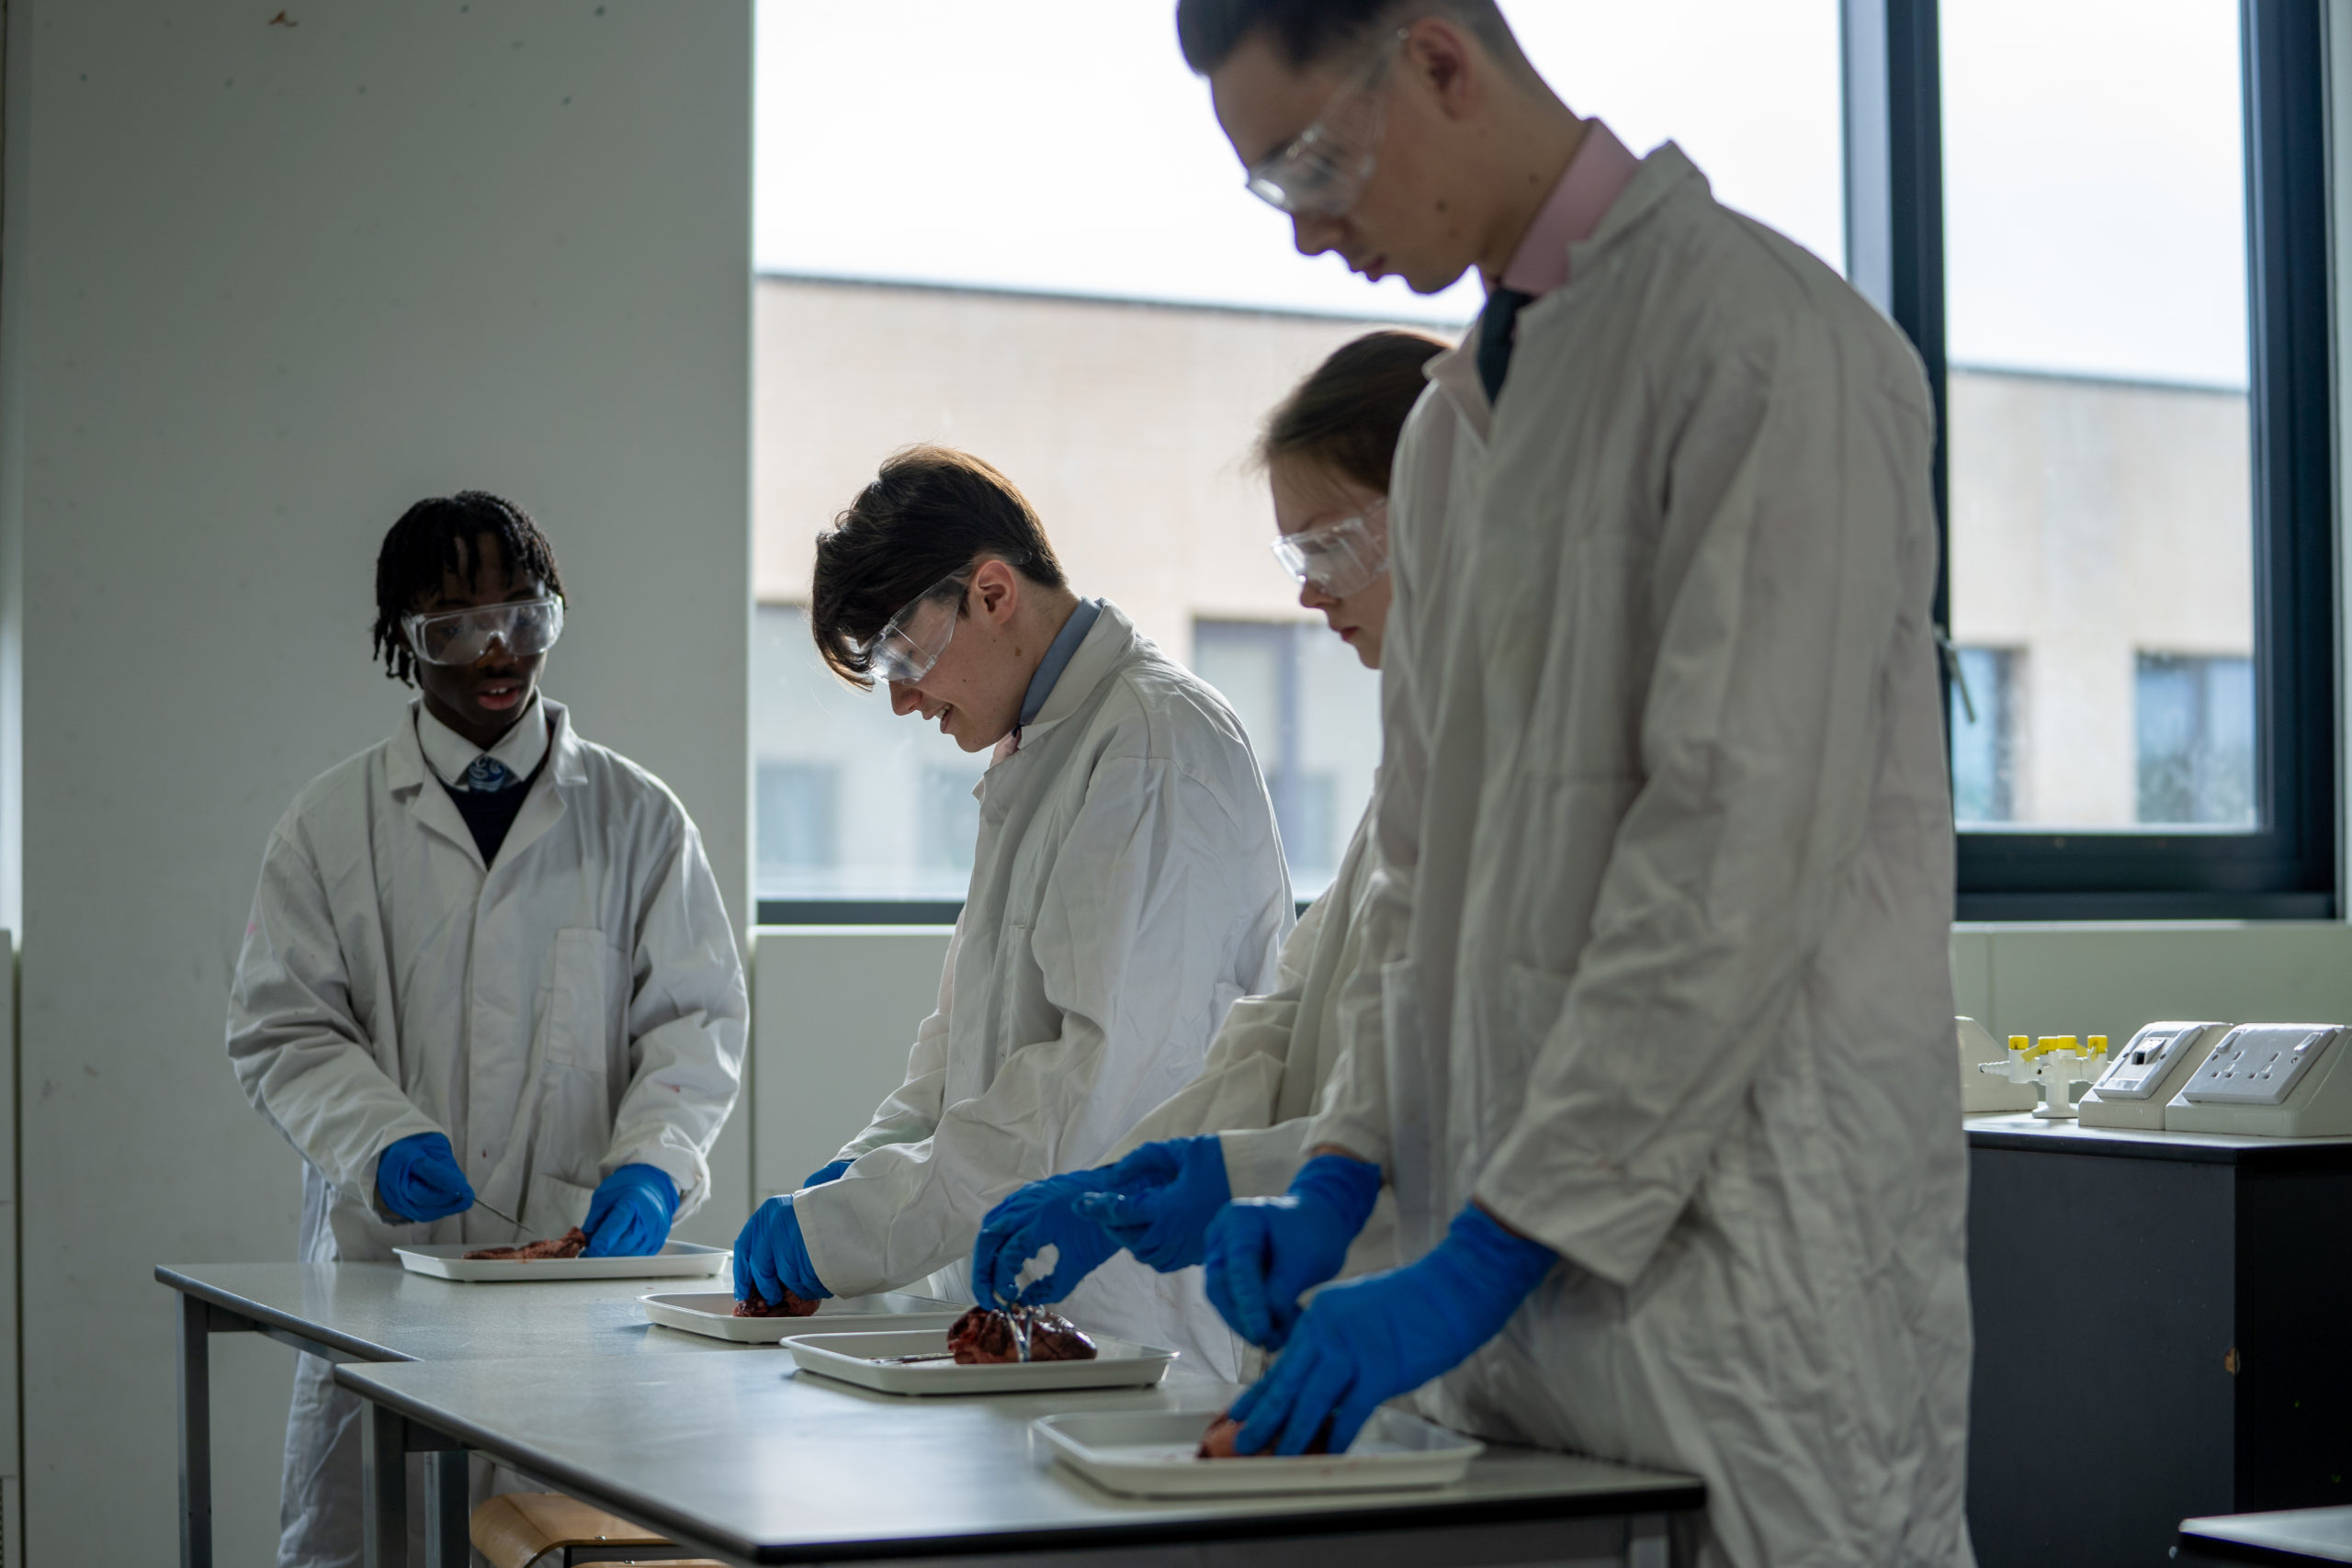 Four students dissecting an organ during a lab session